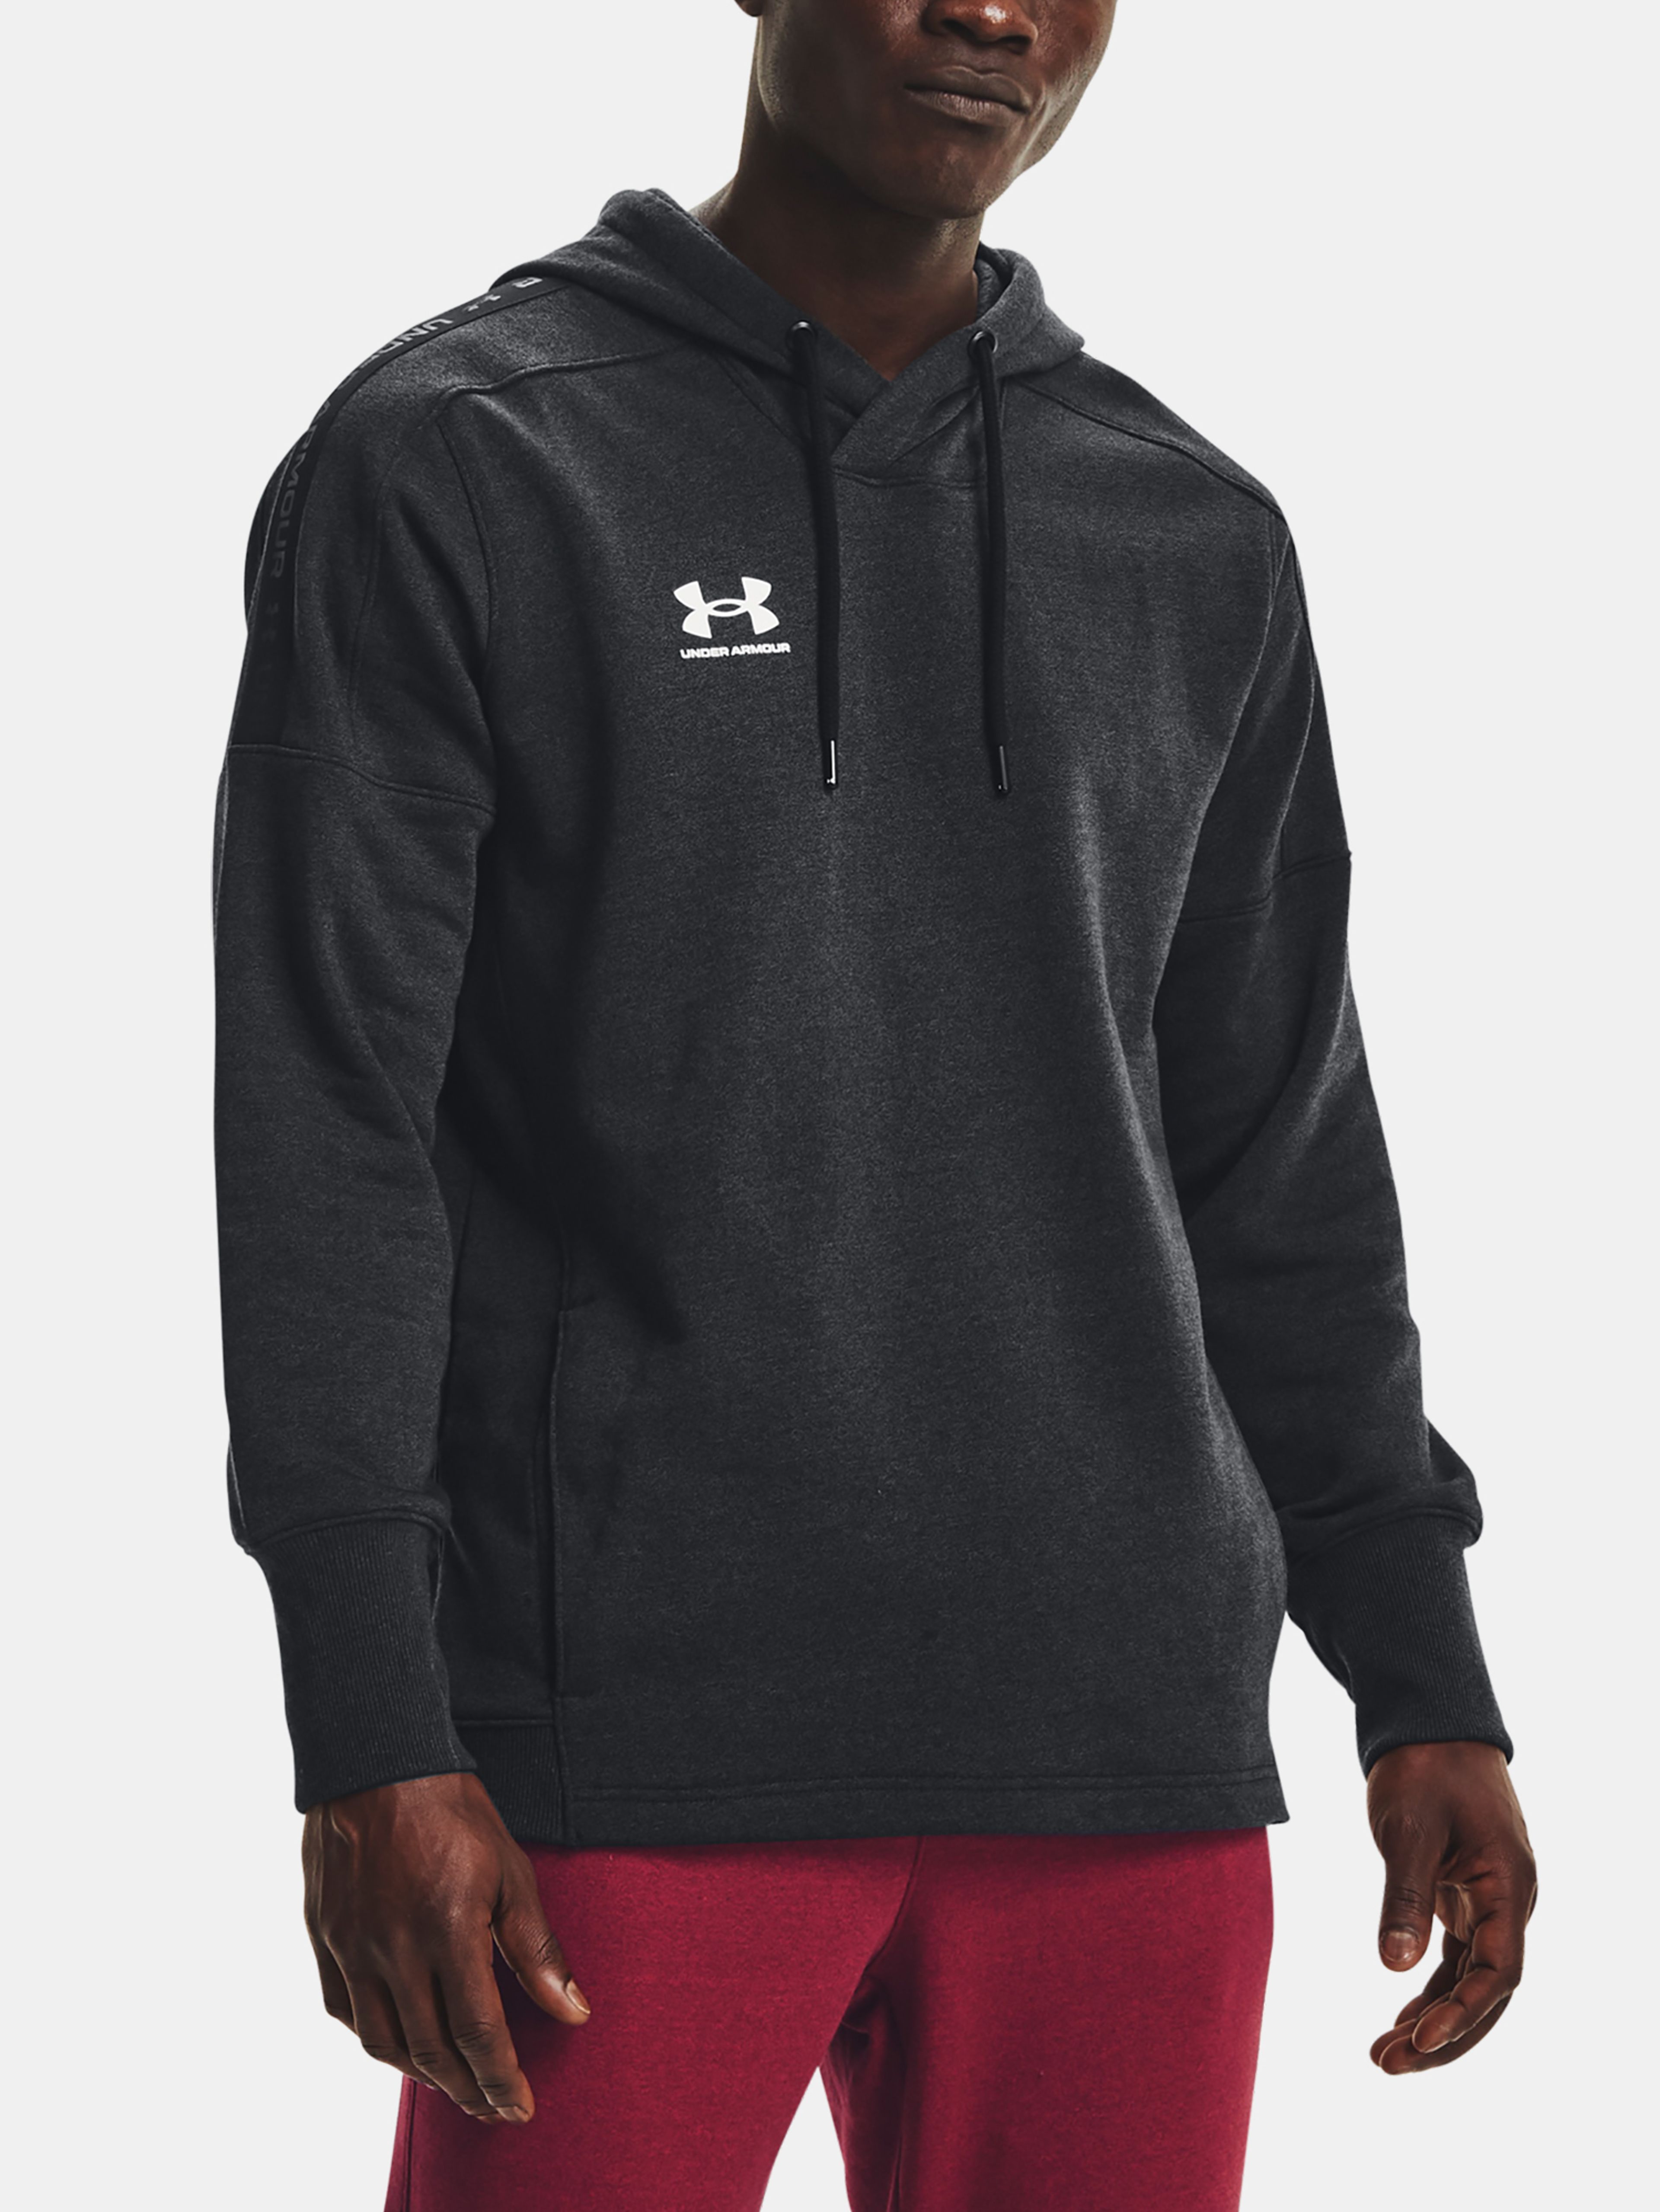 Under Armour Accelerate Off-Pitch Hoodie felső